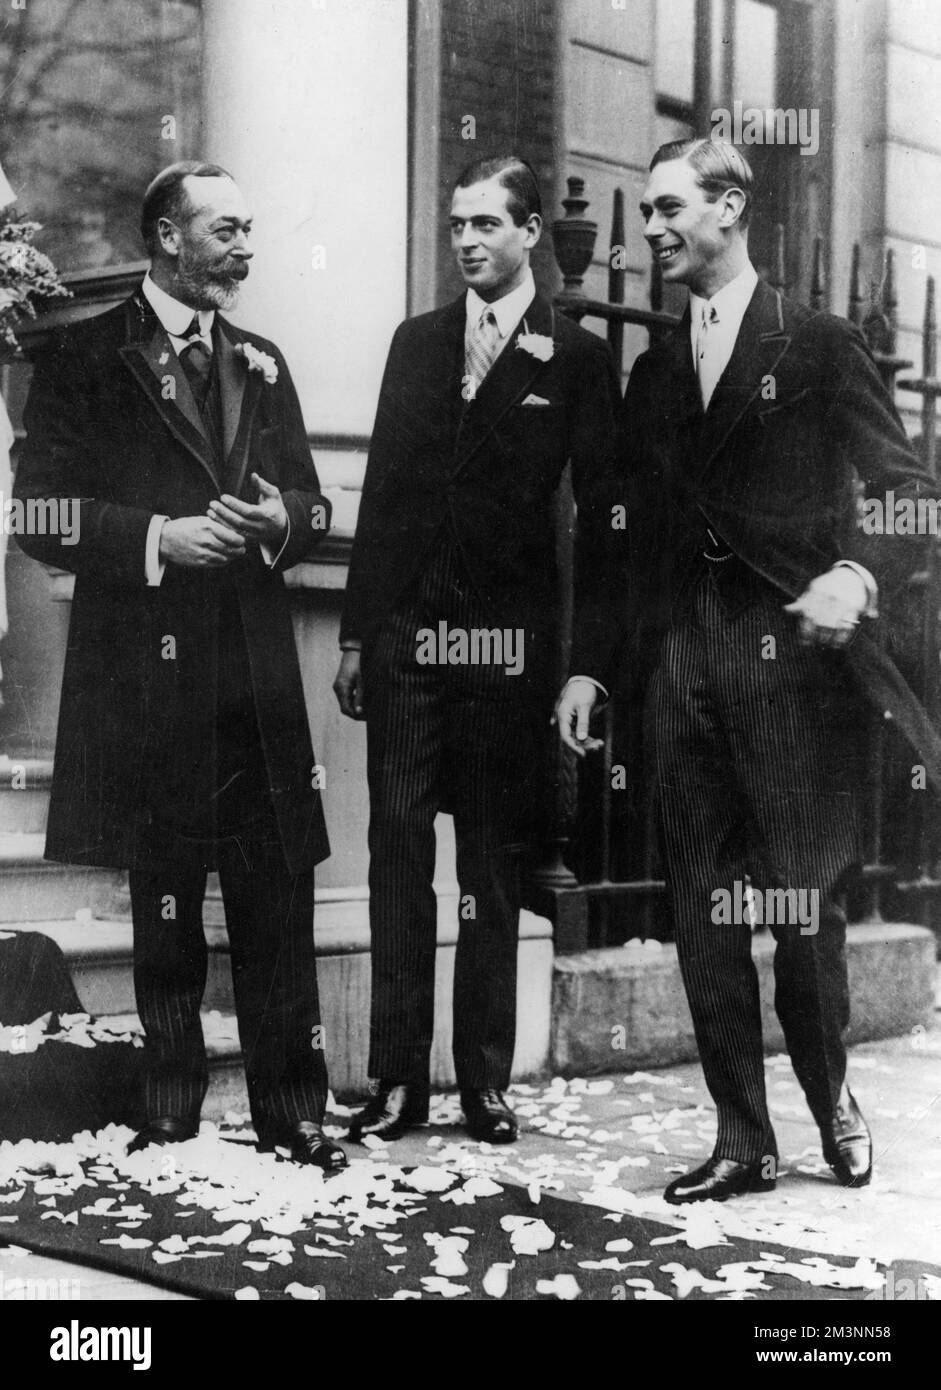 Informal photograph of King George V pictured with two of his sons, Prince George (centre), later Duke of Kent and Prince Albert, later King George VI, all at the wedding of Princess Maud of Fife, the King's niece.  The royal party had just seen the newlyweds (she married Charles Carnegie, Earl of Southesk on November 12th 1923 at the Guards Chapel) hence the confetti of petals lying on the ground.       Date: 1923 Stock Photo